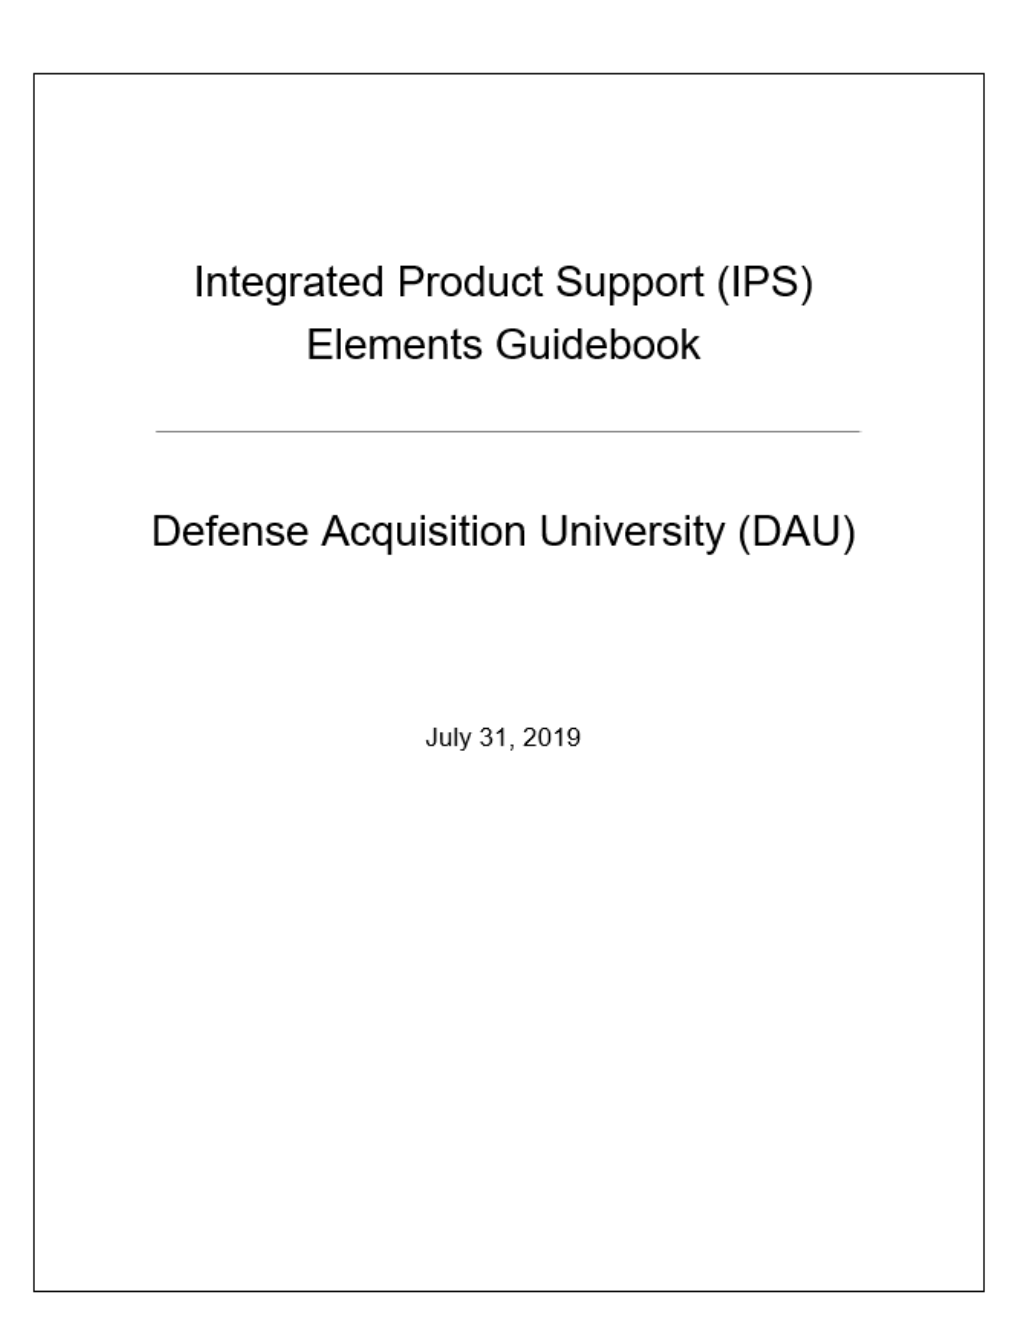 Integrated Product Support (IPS) Elements Guidebook Has Now Also Been Extensively Updated to Reflect Current Policy and Guidance